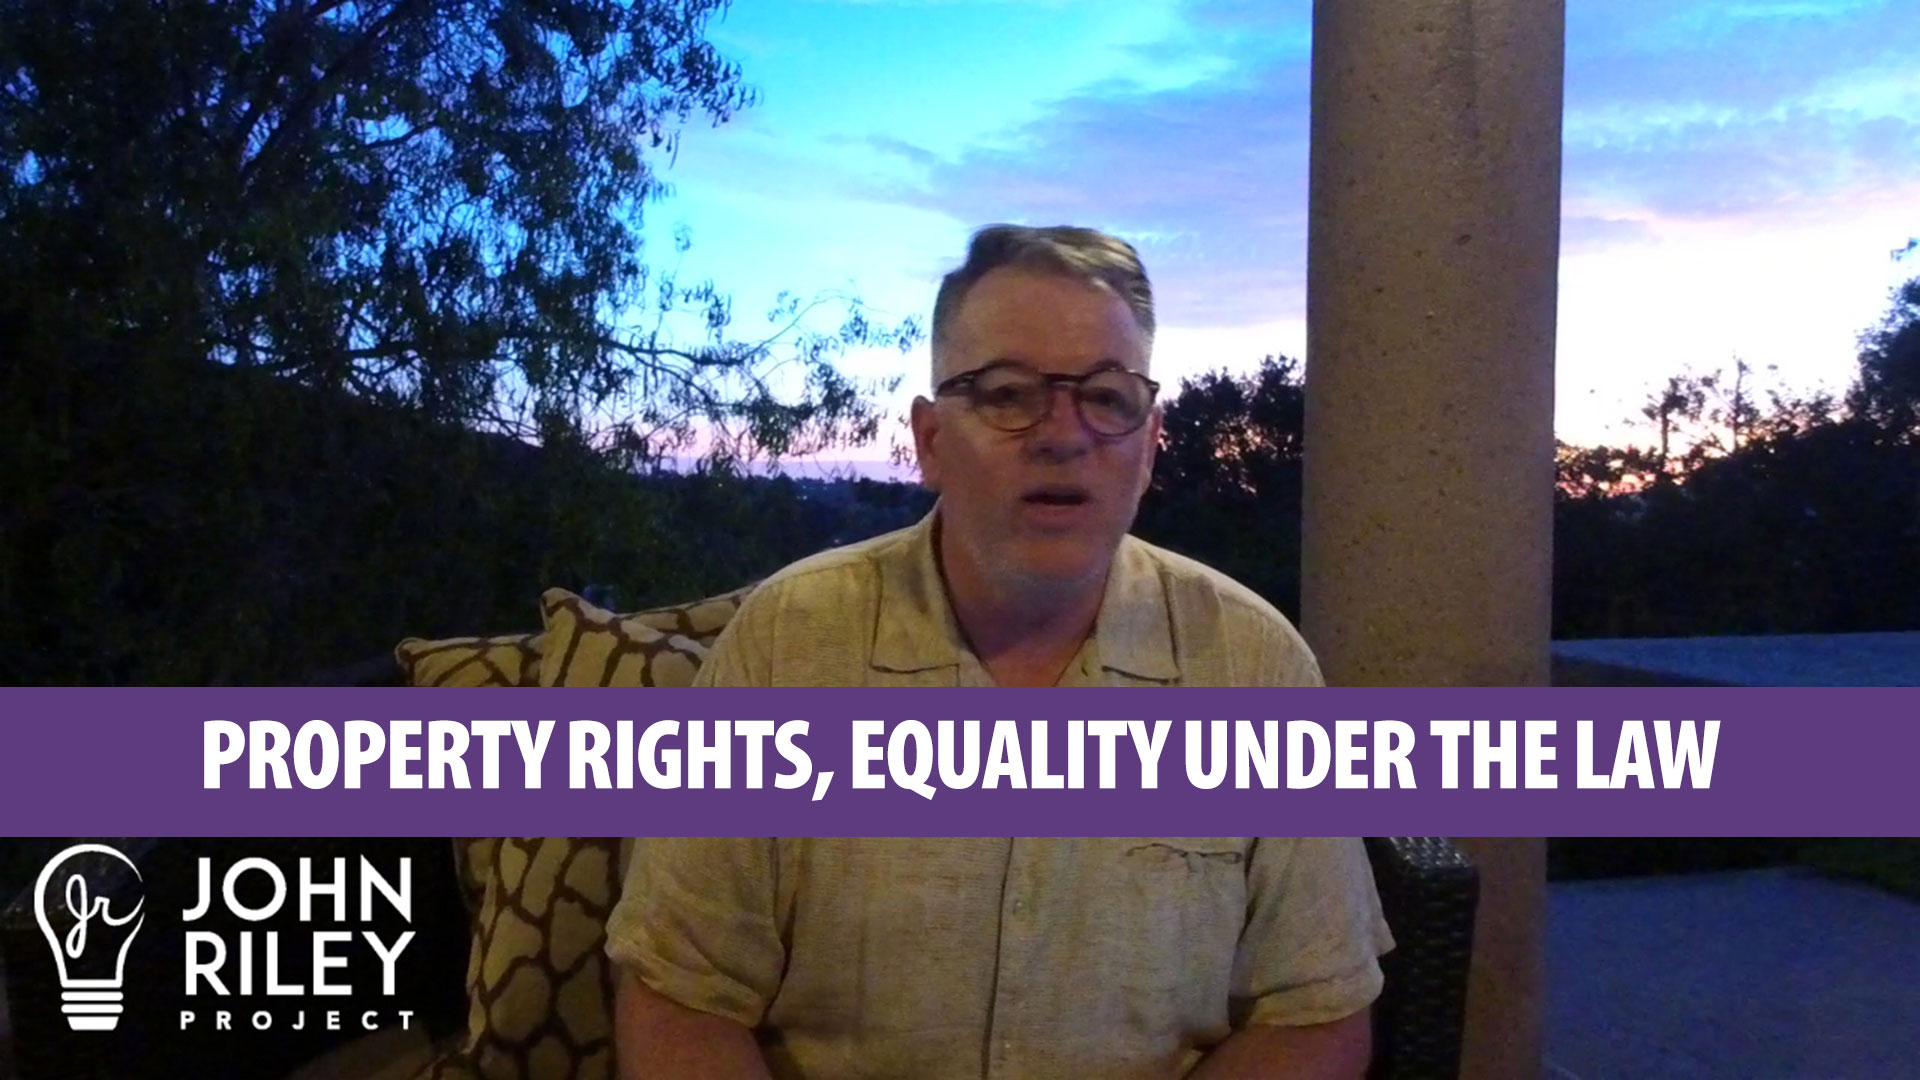 Property Rights, Equality Under the Law, Poway, John Riley Project, JRP0062